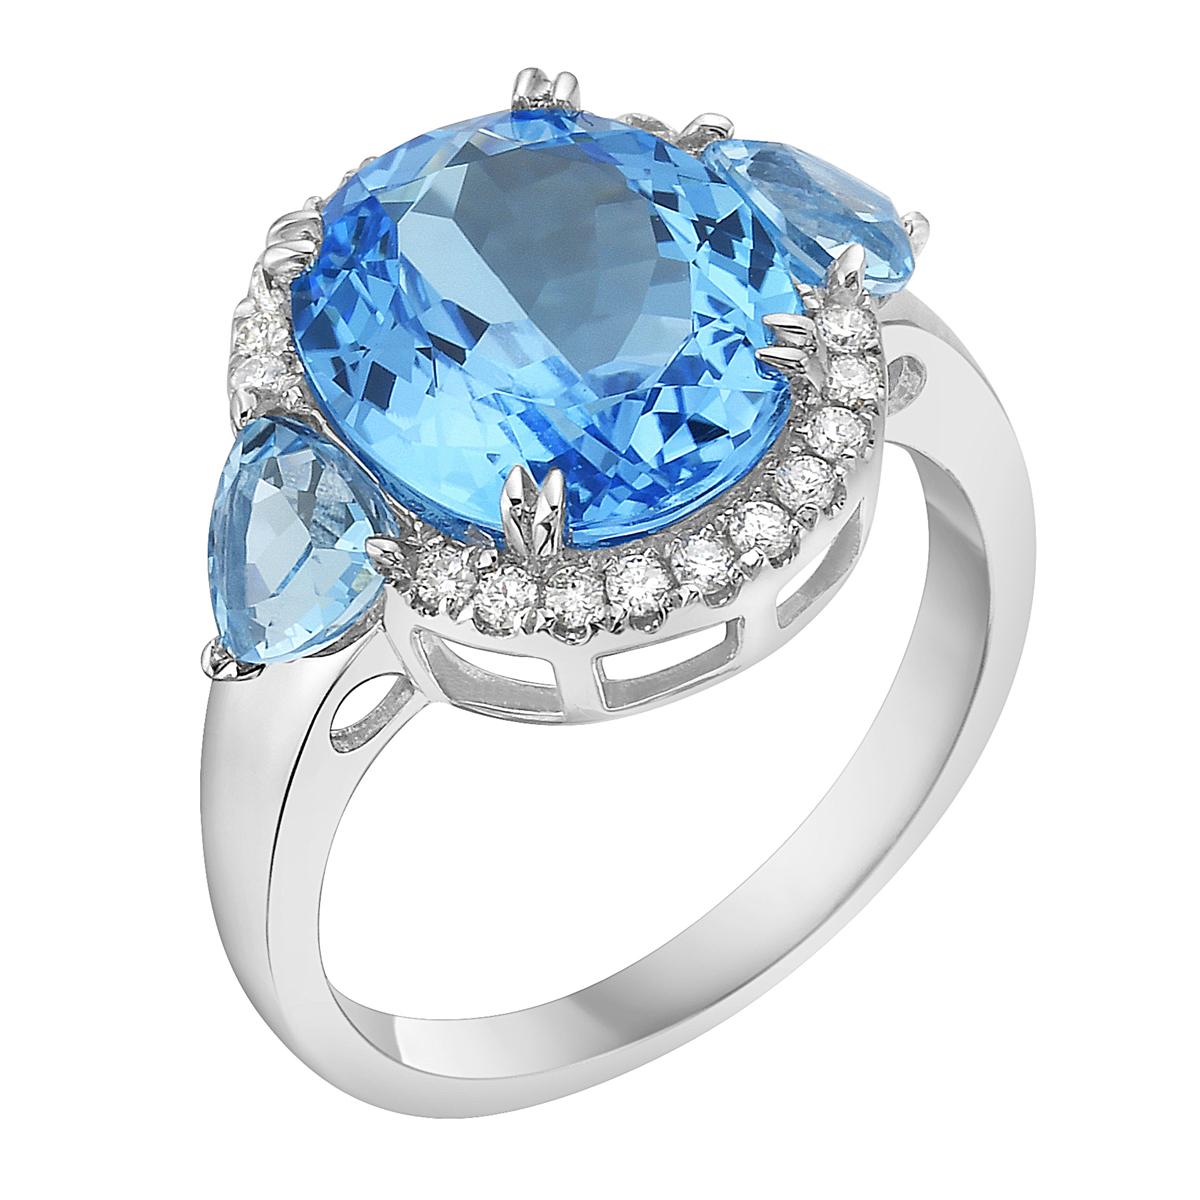 With this exquisite semi-precious swiss blue topaz ring, style and glamour are in the spotlight. This 14-karat oval cut ring is made from 3.4 grams of gold, 3 swiss blue topaz's totaling 6.62 karats, and is surrounded by 20 round SI1-SI2, GH color